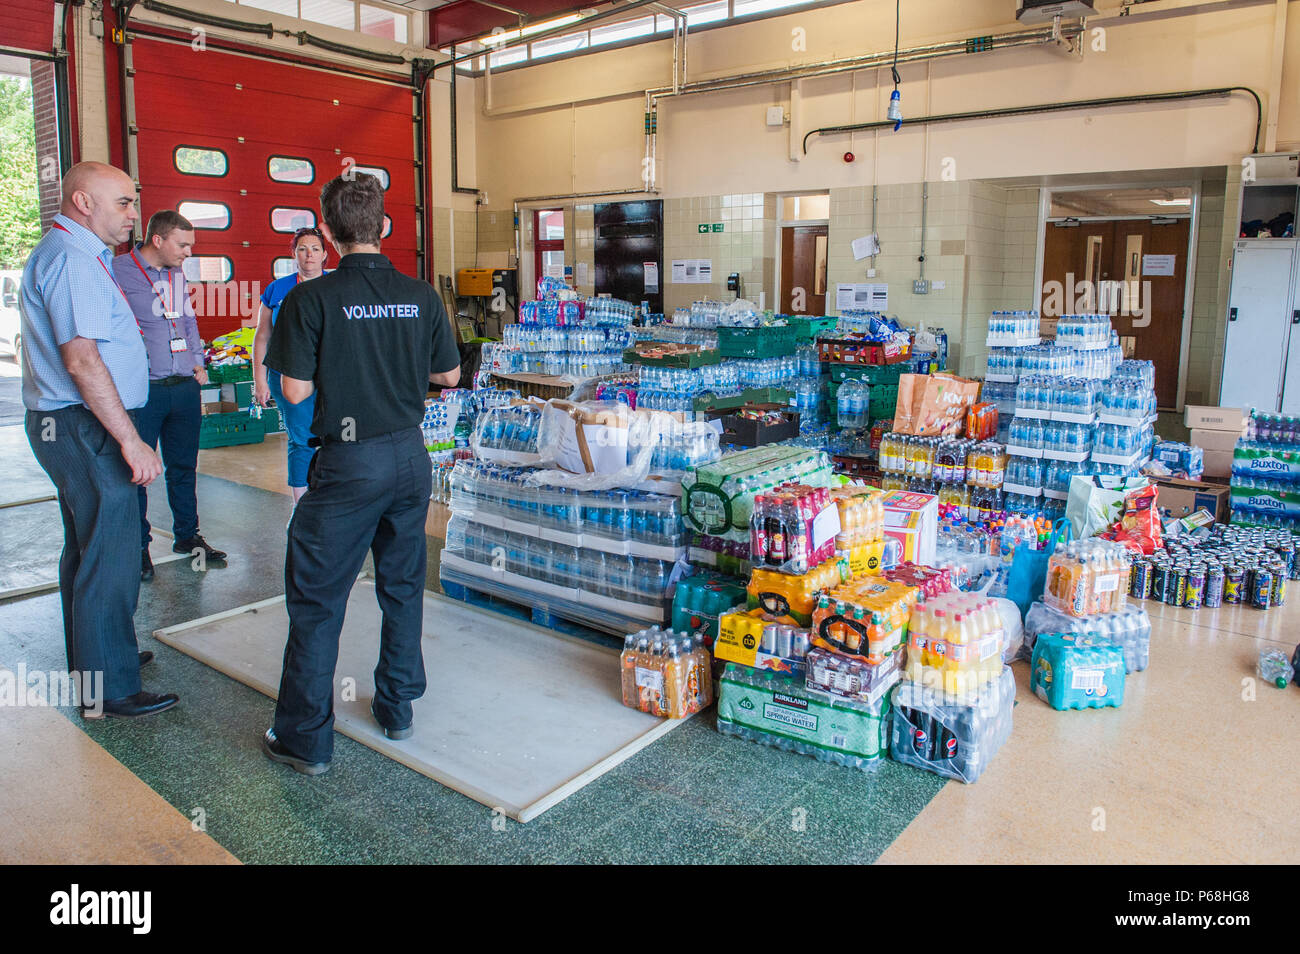 Stalybridge Fire Station, Greater Manchester, UK. 29th June, 2018. Staff and volunteers sort through a deluge of supplies including water and food given by the public and local businesses for the needs of firefighters tackling the huge blaze on Saddleworth Moor, at Stalybridge Fire Station, Greater Manchester on Friday 29th June 2018. Credit: Matthew Wilkinson/Alamy Live News Stock Photo